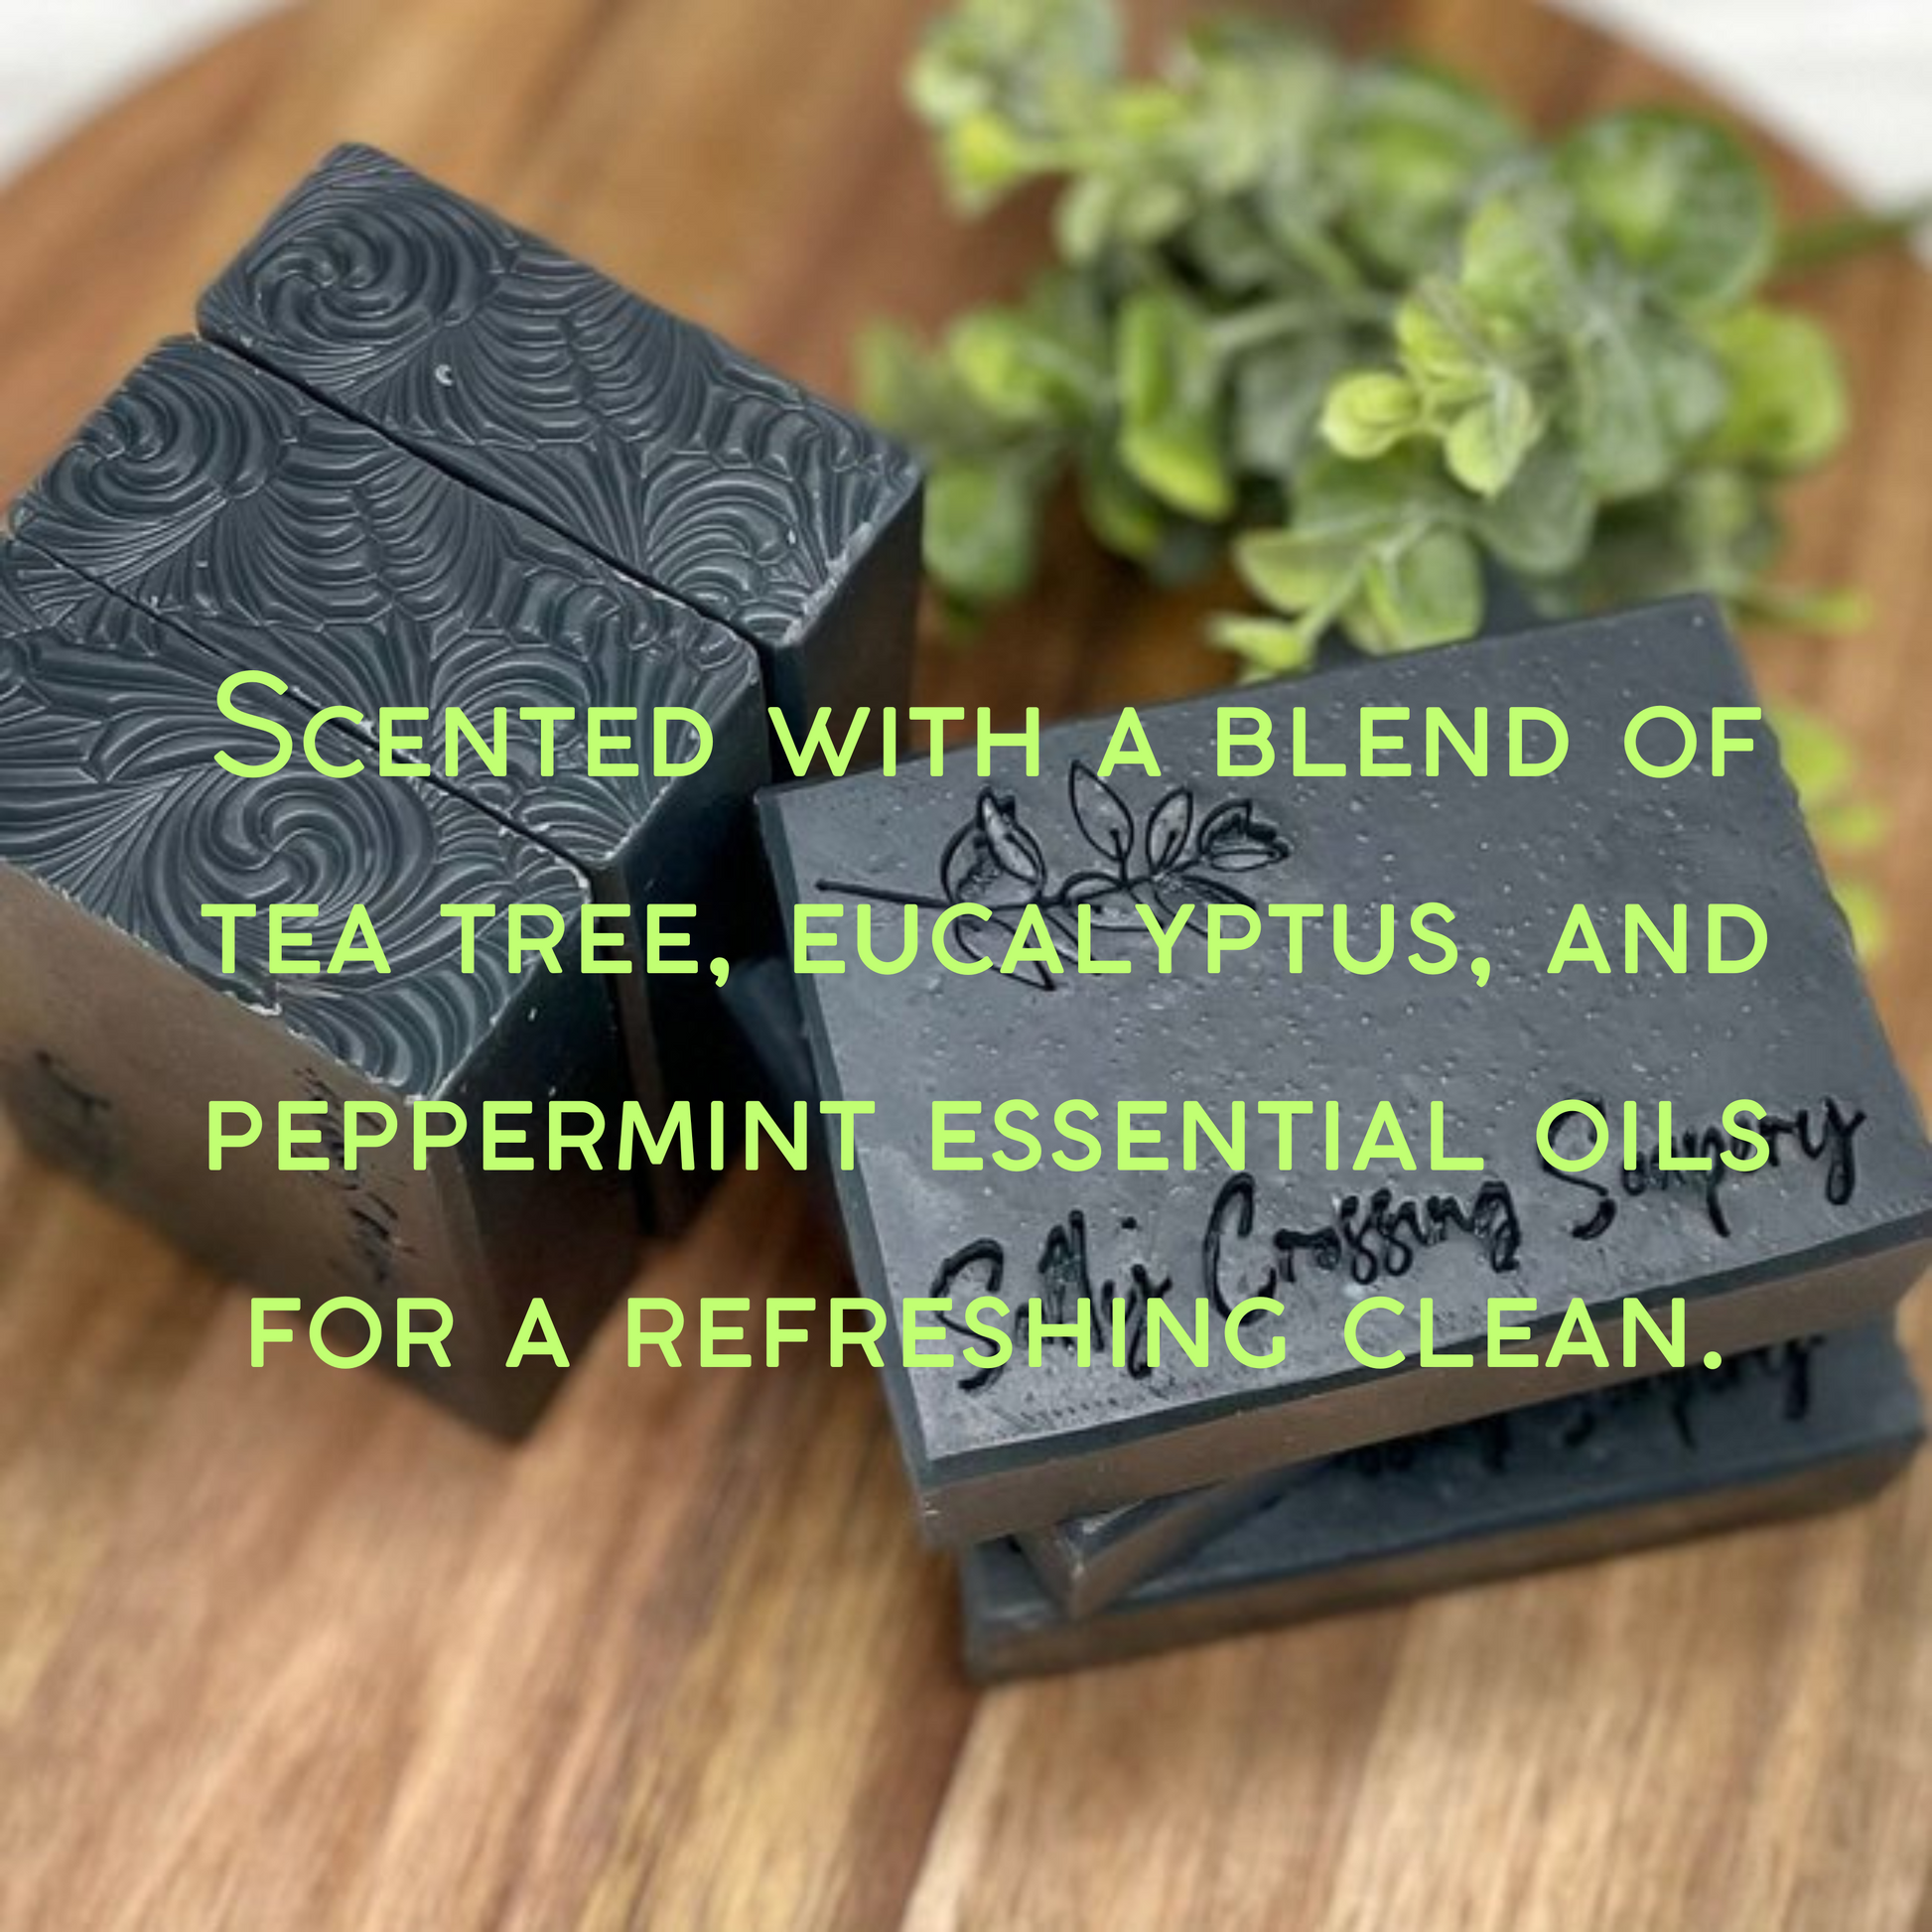 scented with a blend of tea tree, eucalyptus, and peppermint essential oils for a refreshing clean. graphic.